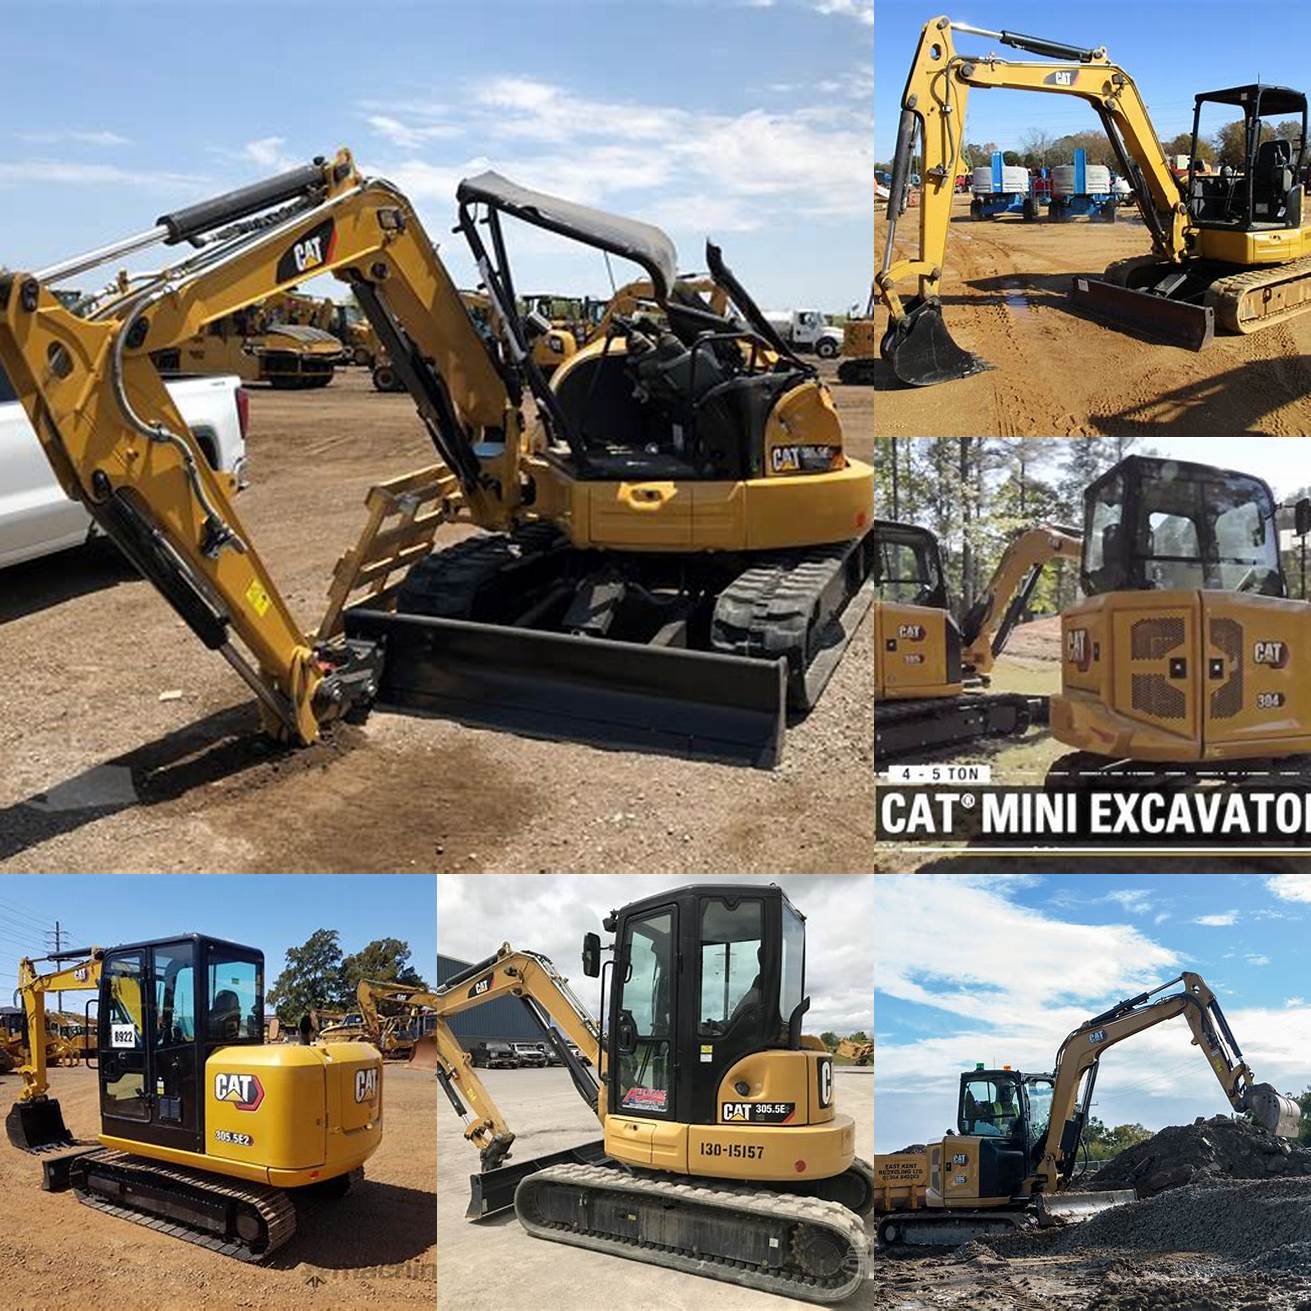 The Cat 305 with attachments